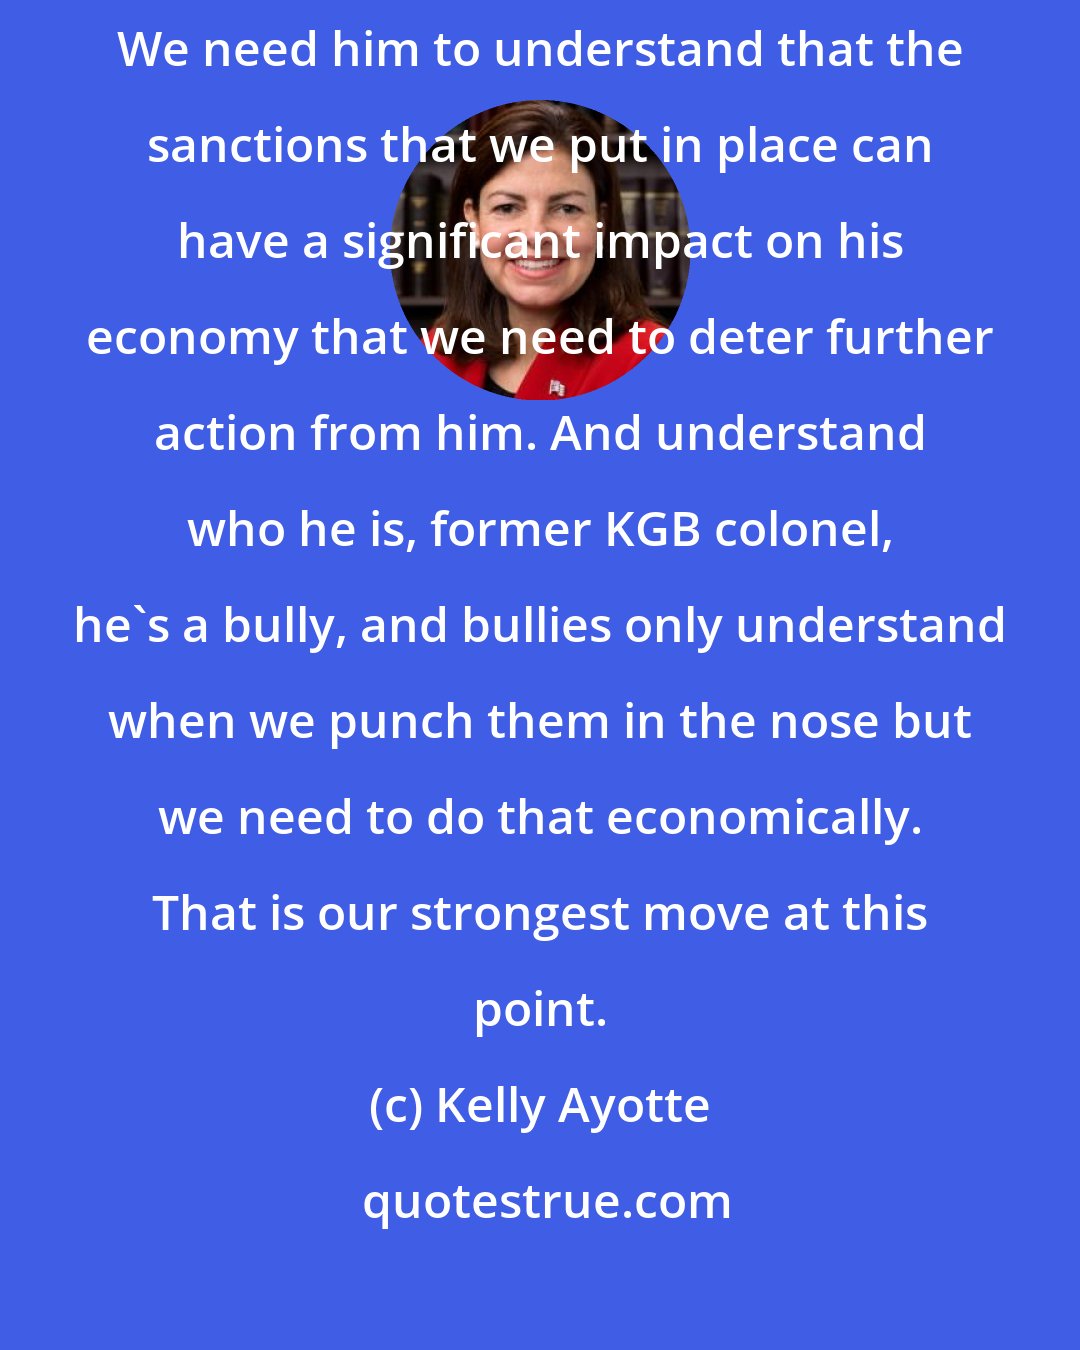 Kelly Ayotte: We need to send a message to Vladimir Putin through stronger sanctions. We need him to understand that the sanctions that we put in place can have a significant impact on his economy that we need to deter further action from him. And understand who he is, former KGB colonel, he's a bully, and bullies only understand when we punch them in the nose but we need to do that economically. That is our strongest move at this point.